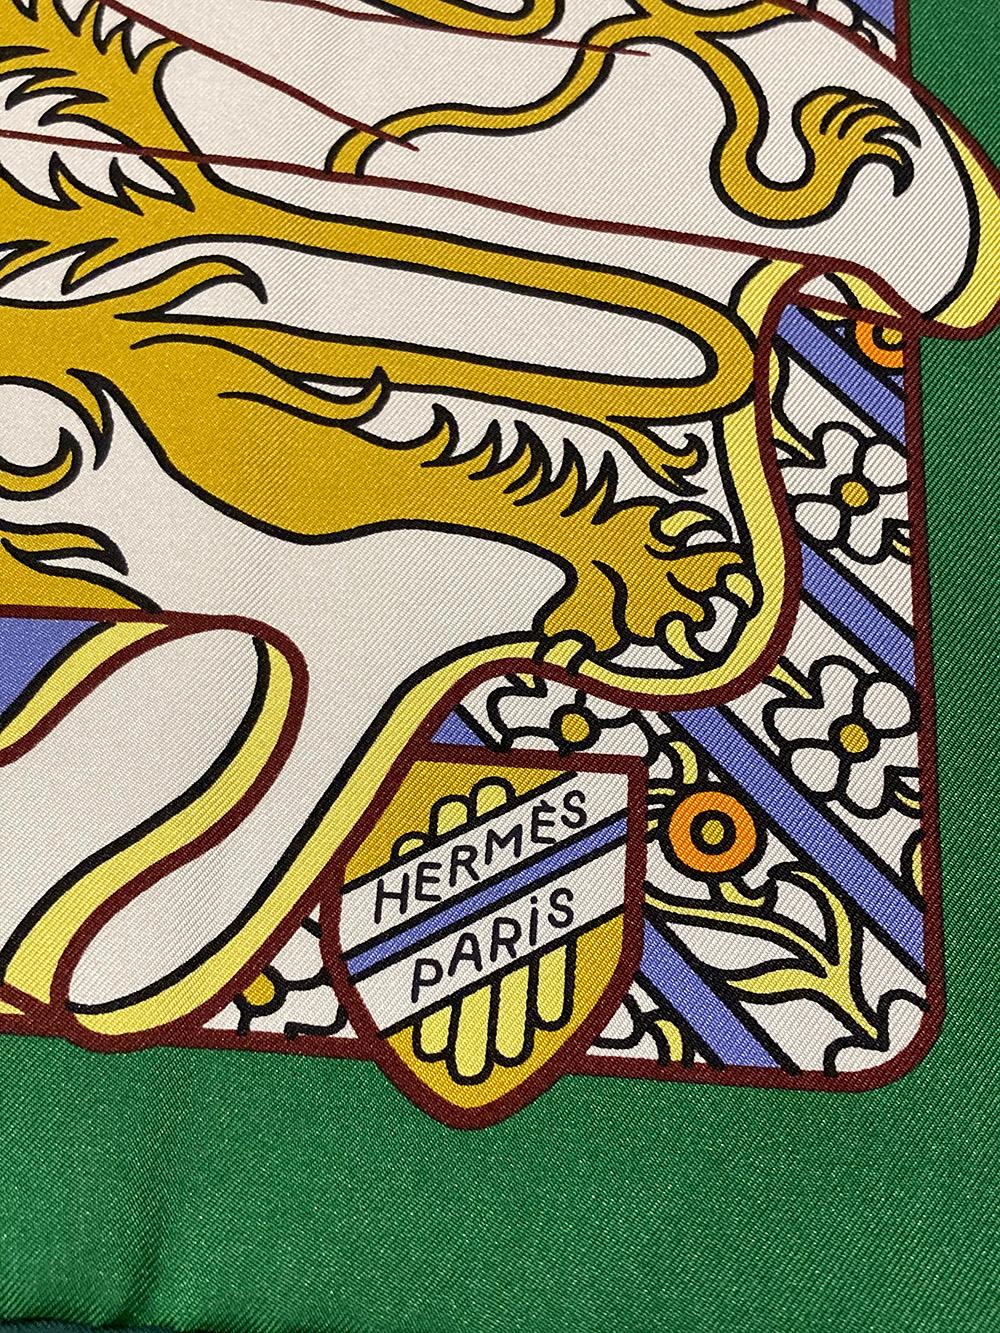 Hermes Duels Oniriques Silk Scarf in excellent like-new condition. Original silk screen design c2019 by Pierre Marie features colorful ornately decorated knights and steeds in dreamy regalia of blues, yellows, gold, orange and white over a green